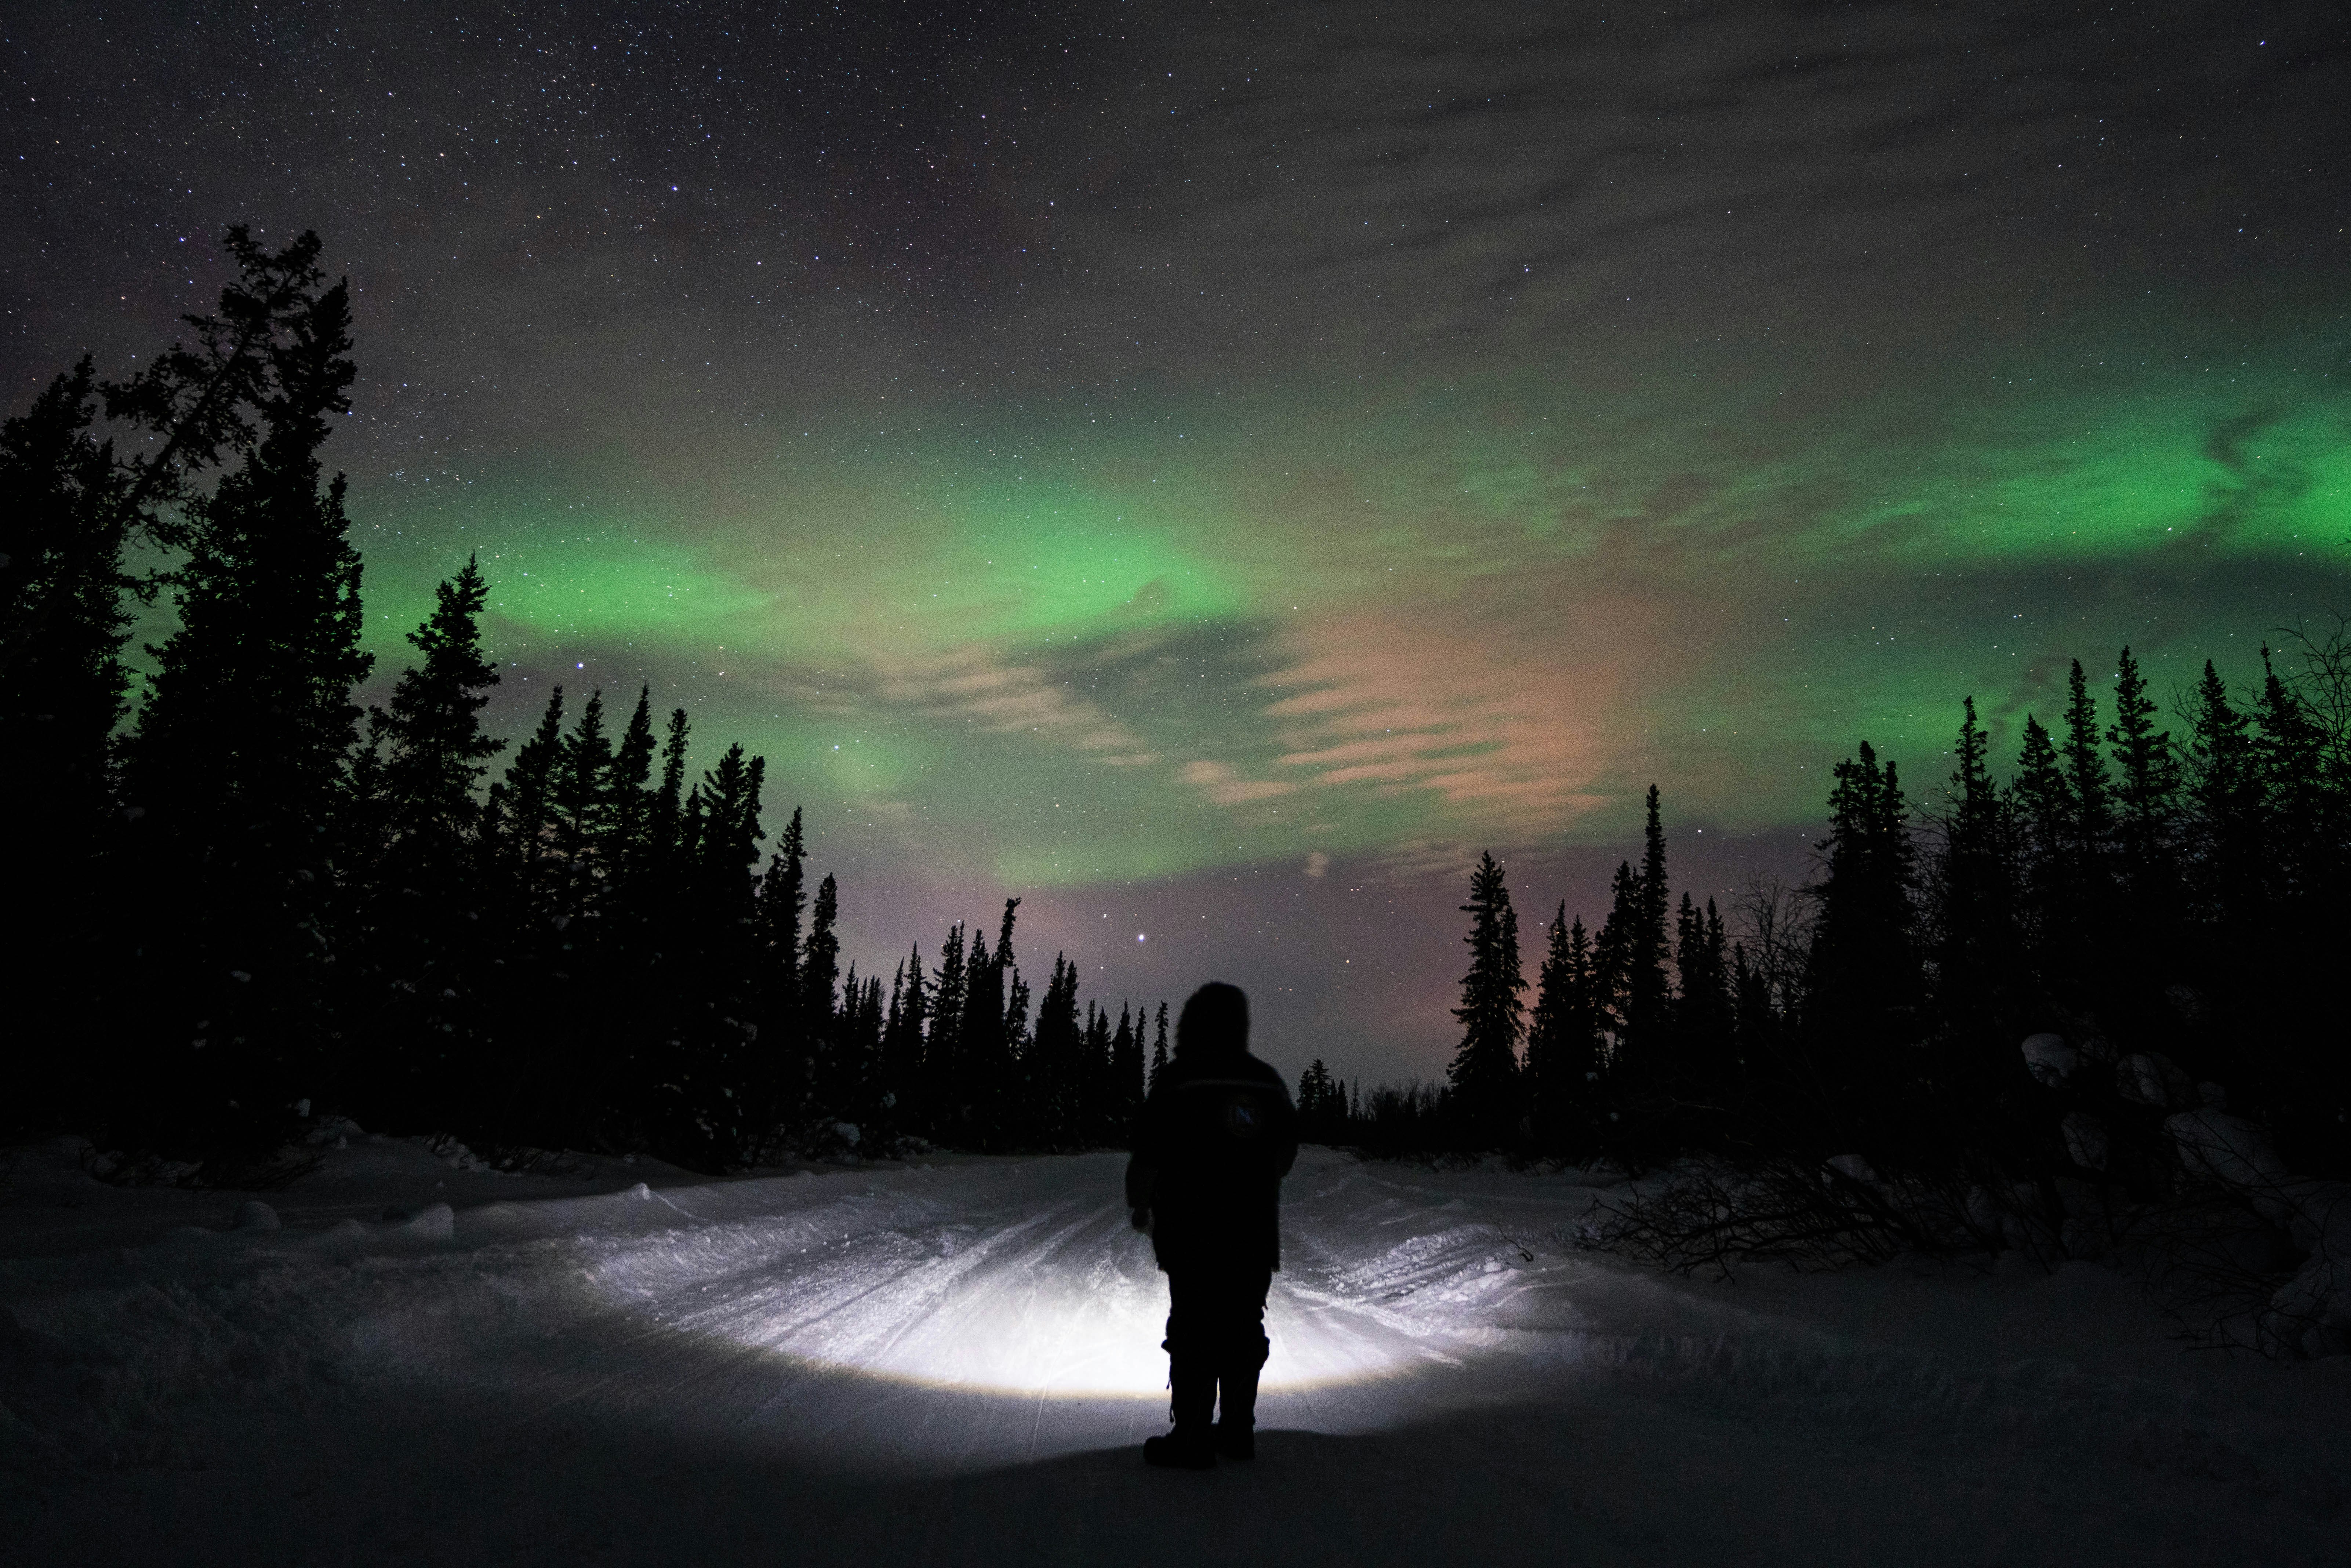 A person wrapped up in snow-gear stands in the middle of a snow-covered road which is lined with trees. They're pointing a flashlight at the ground and the sky is glowing green from the northern lights.